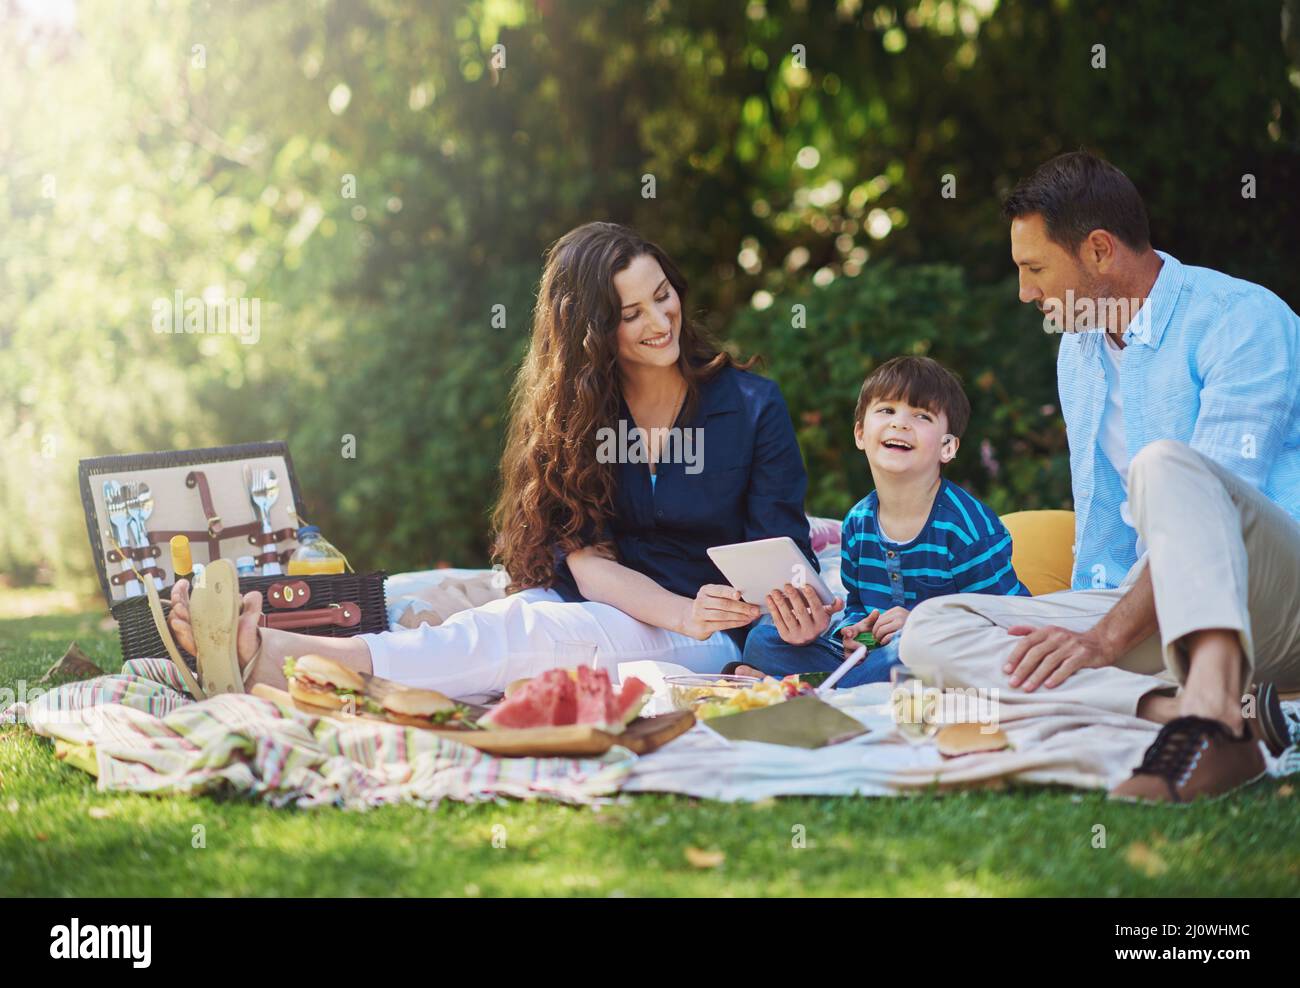 Having lunch outside is awesome. Shot of a young family using a digital tablet during a picnic in the park. Stock Photo